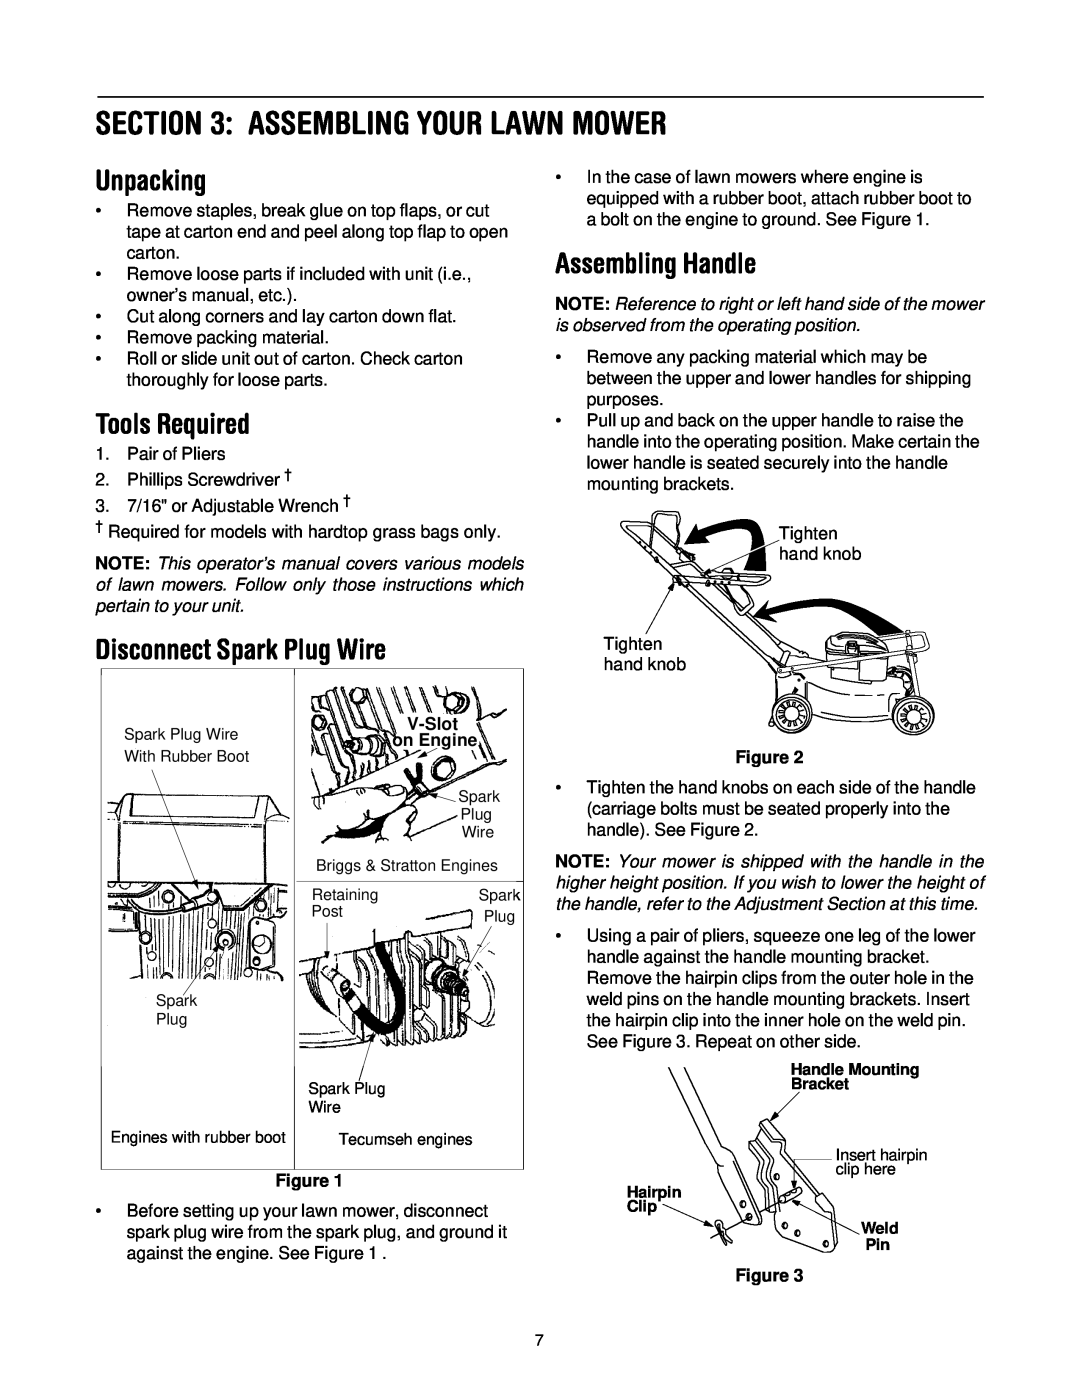 Yard Machines 429 Assembling Your Lawn Mower, Unpacking, Tools Required, Disconnect Spark Plug Wire, Assembling Handle 